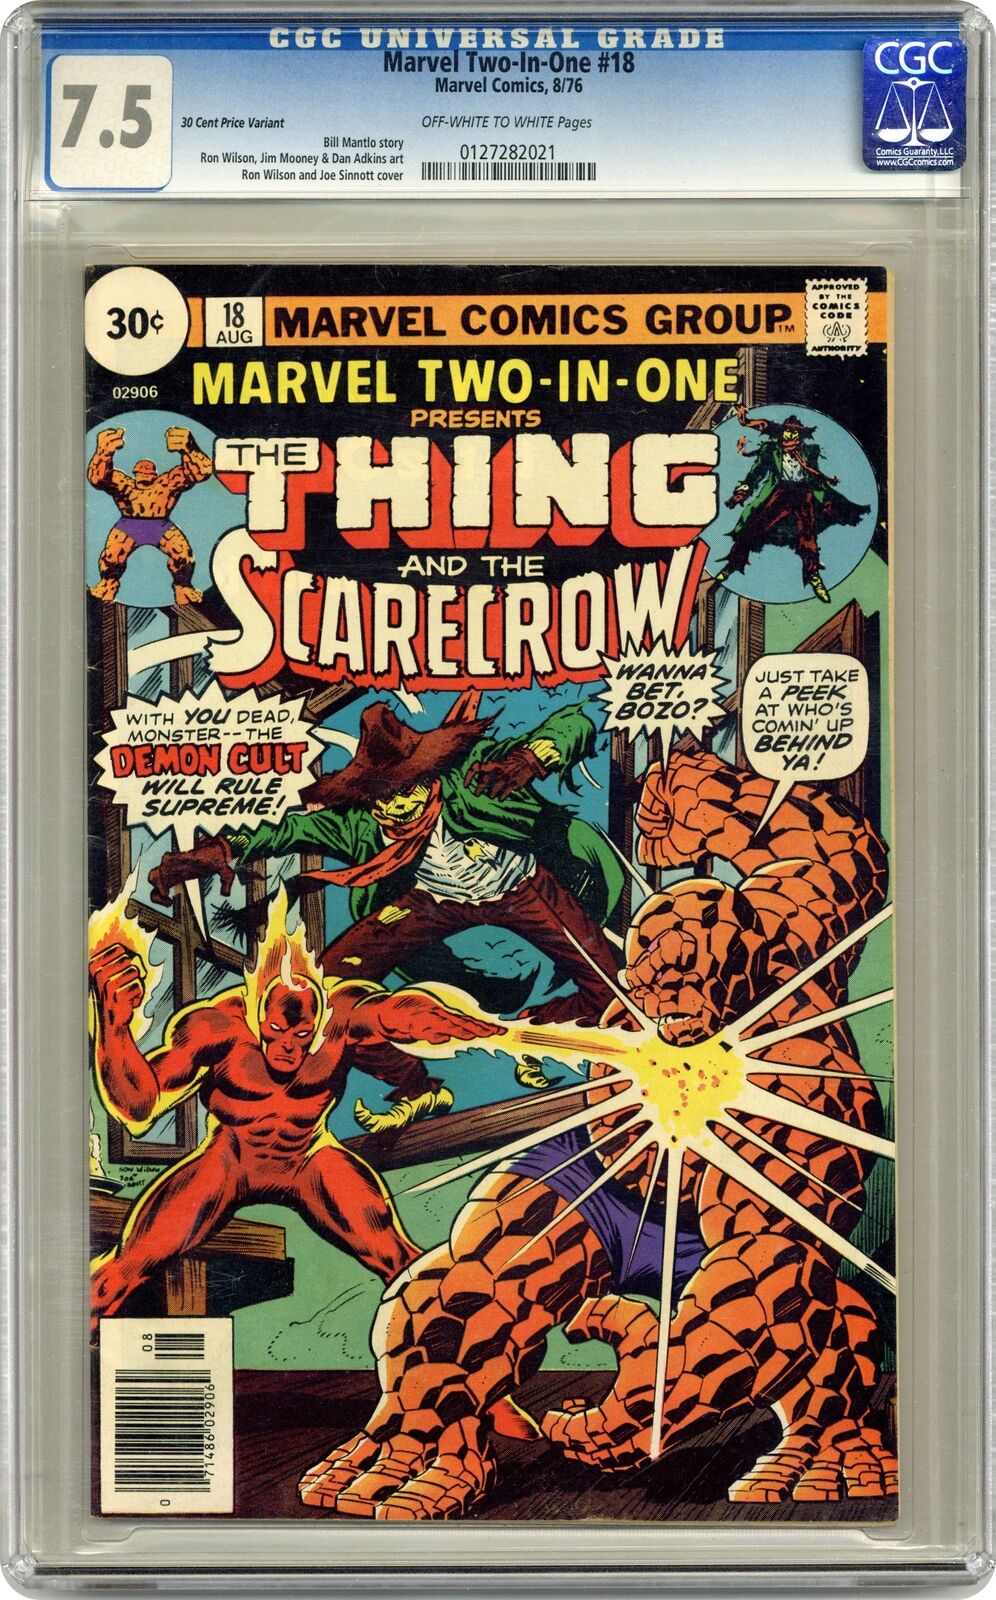 Marvel Two-in-One 30 Cent Variant #18 CGC 7.5 1976 0127282021